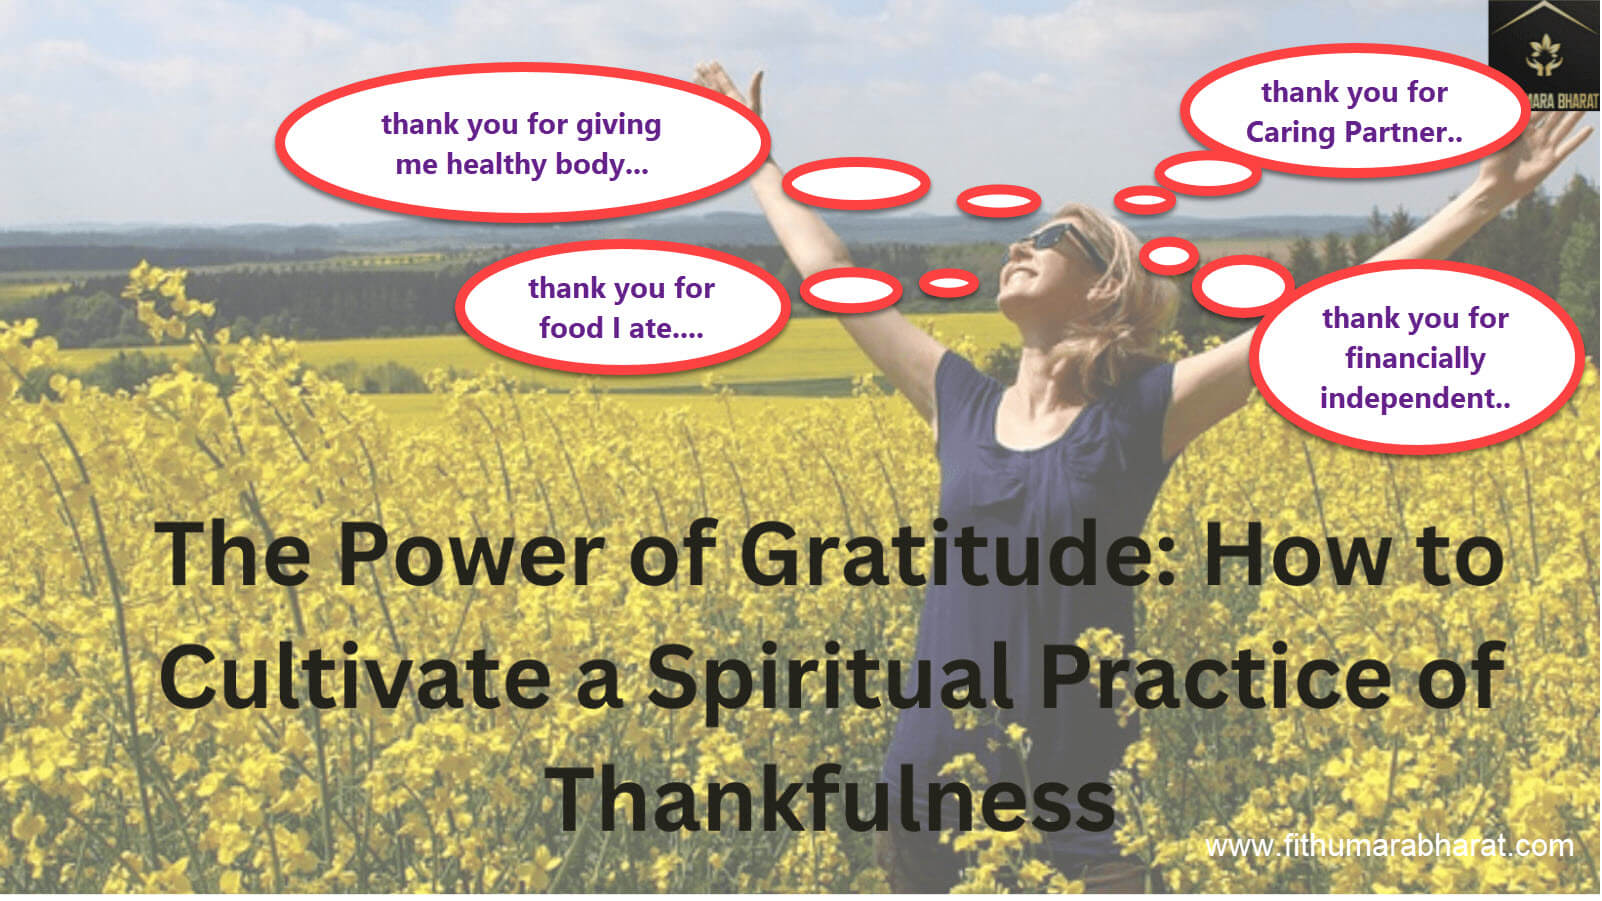 How to Cultivate a Spiritual Practice of Thankfulness, ways to practice gratitude